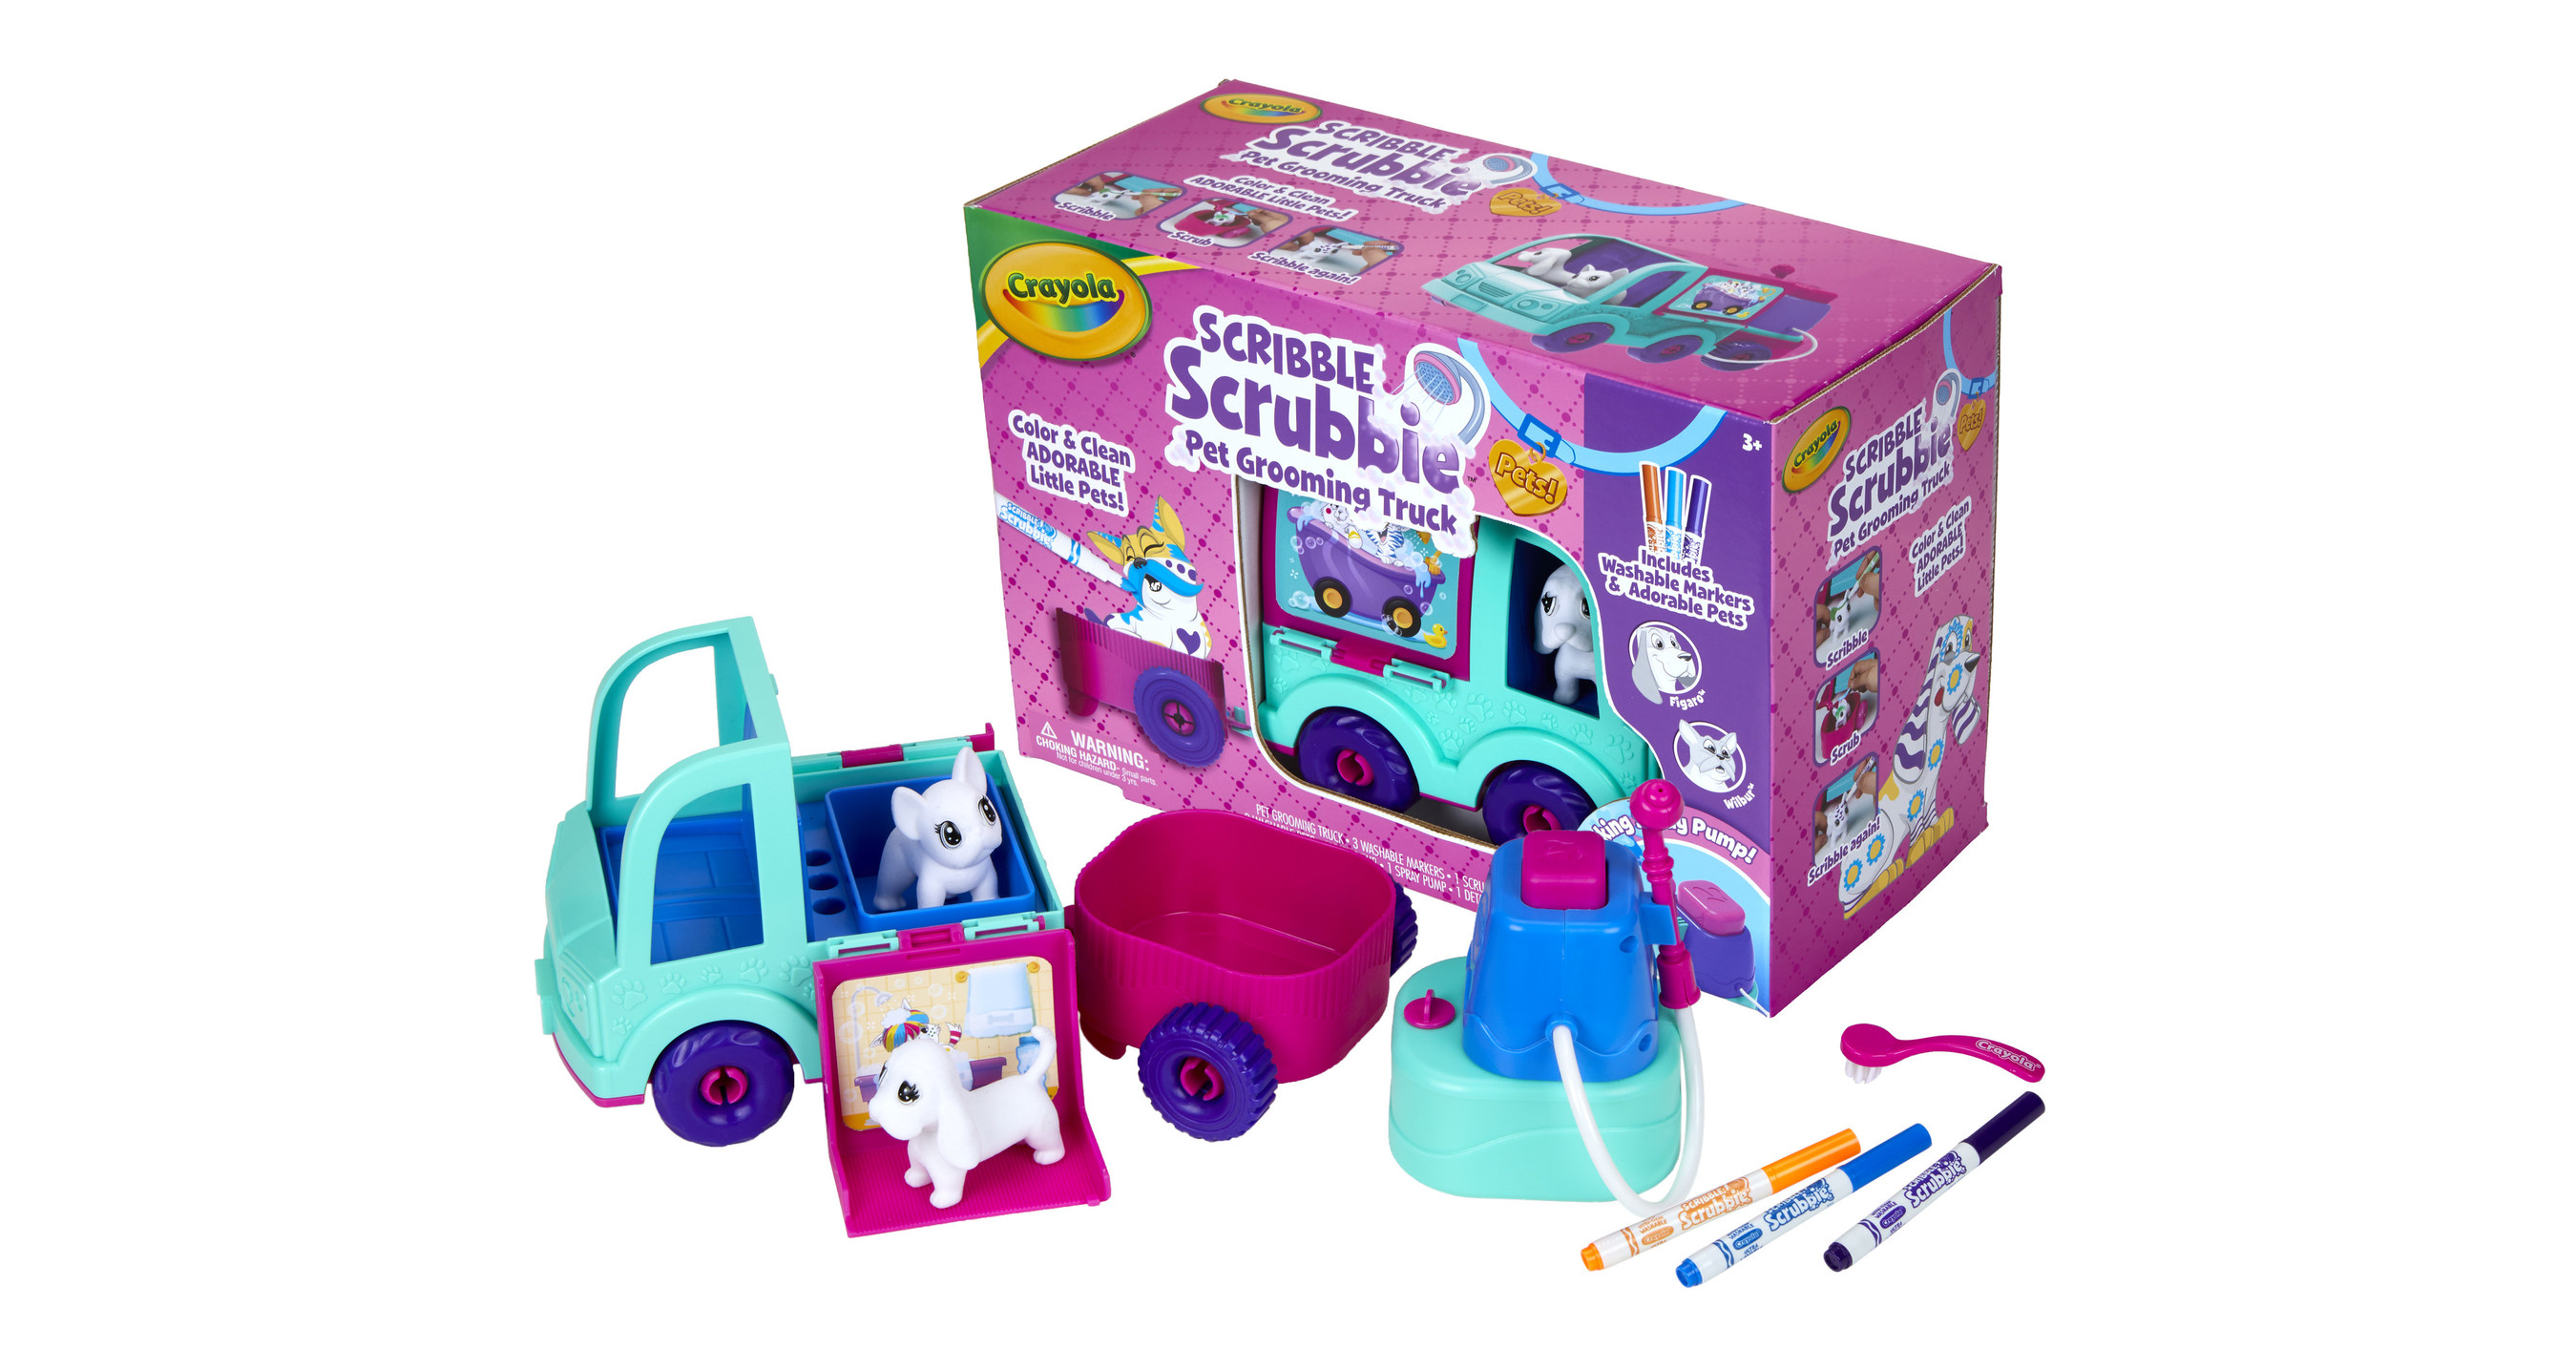 Learn About Scribble Scrubbie Pet Toys for Kids